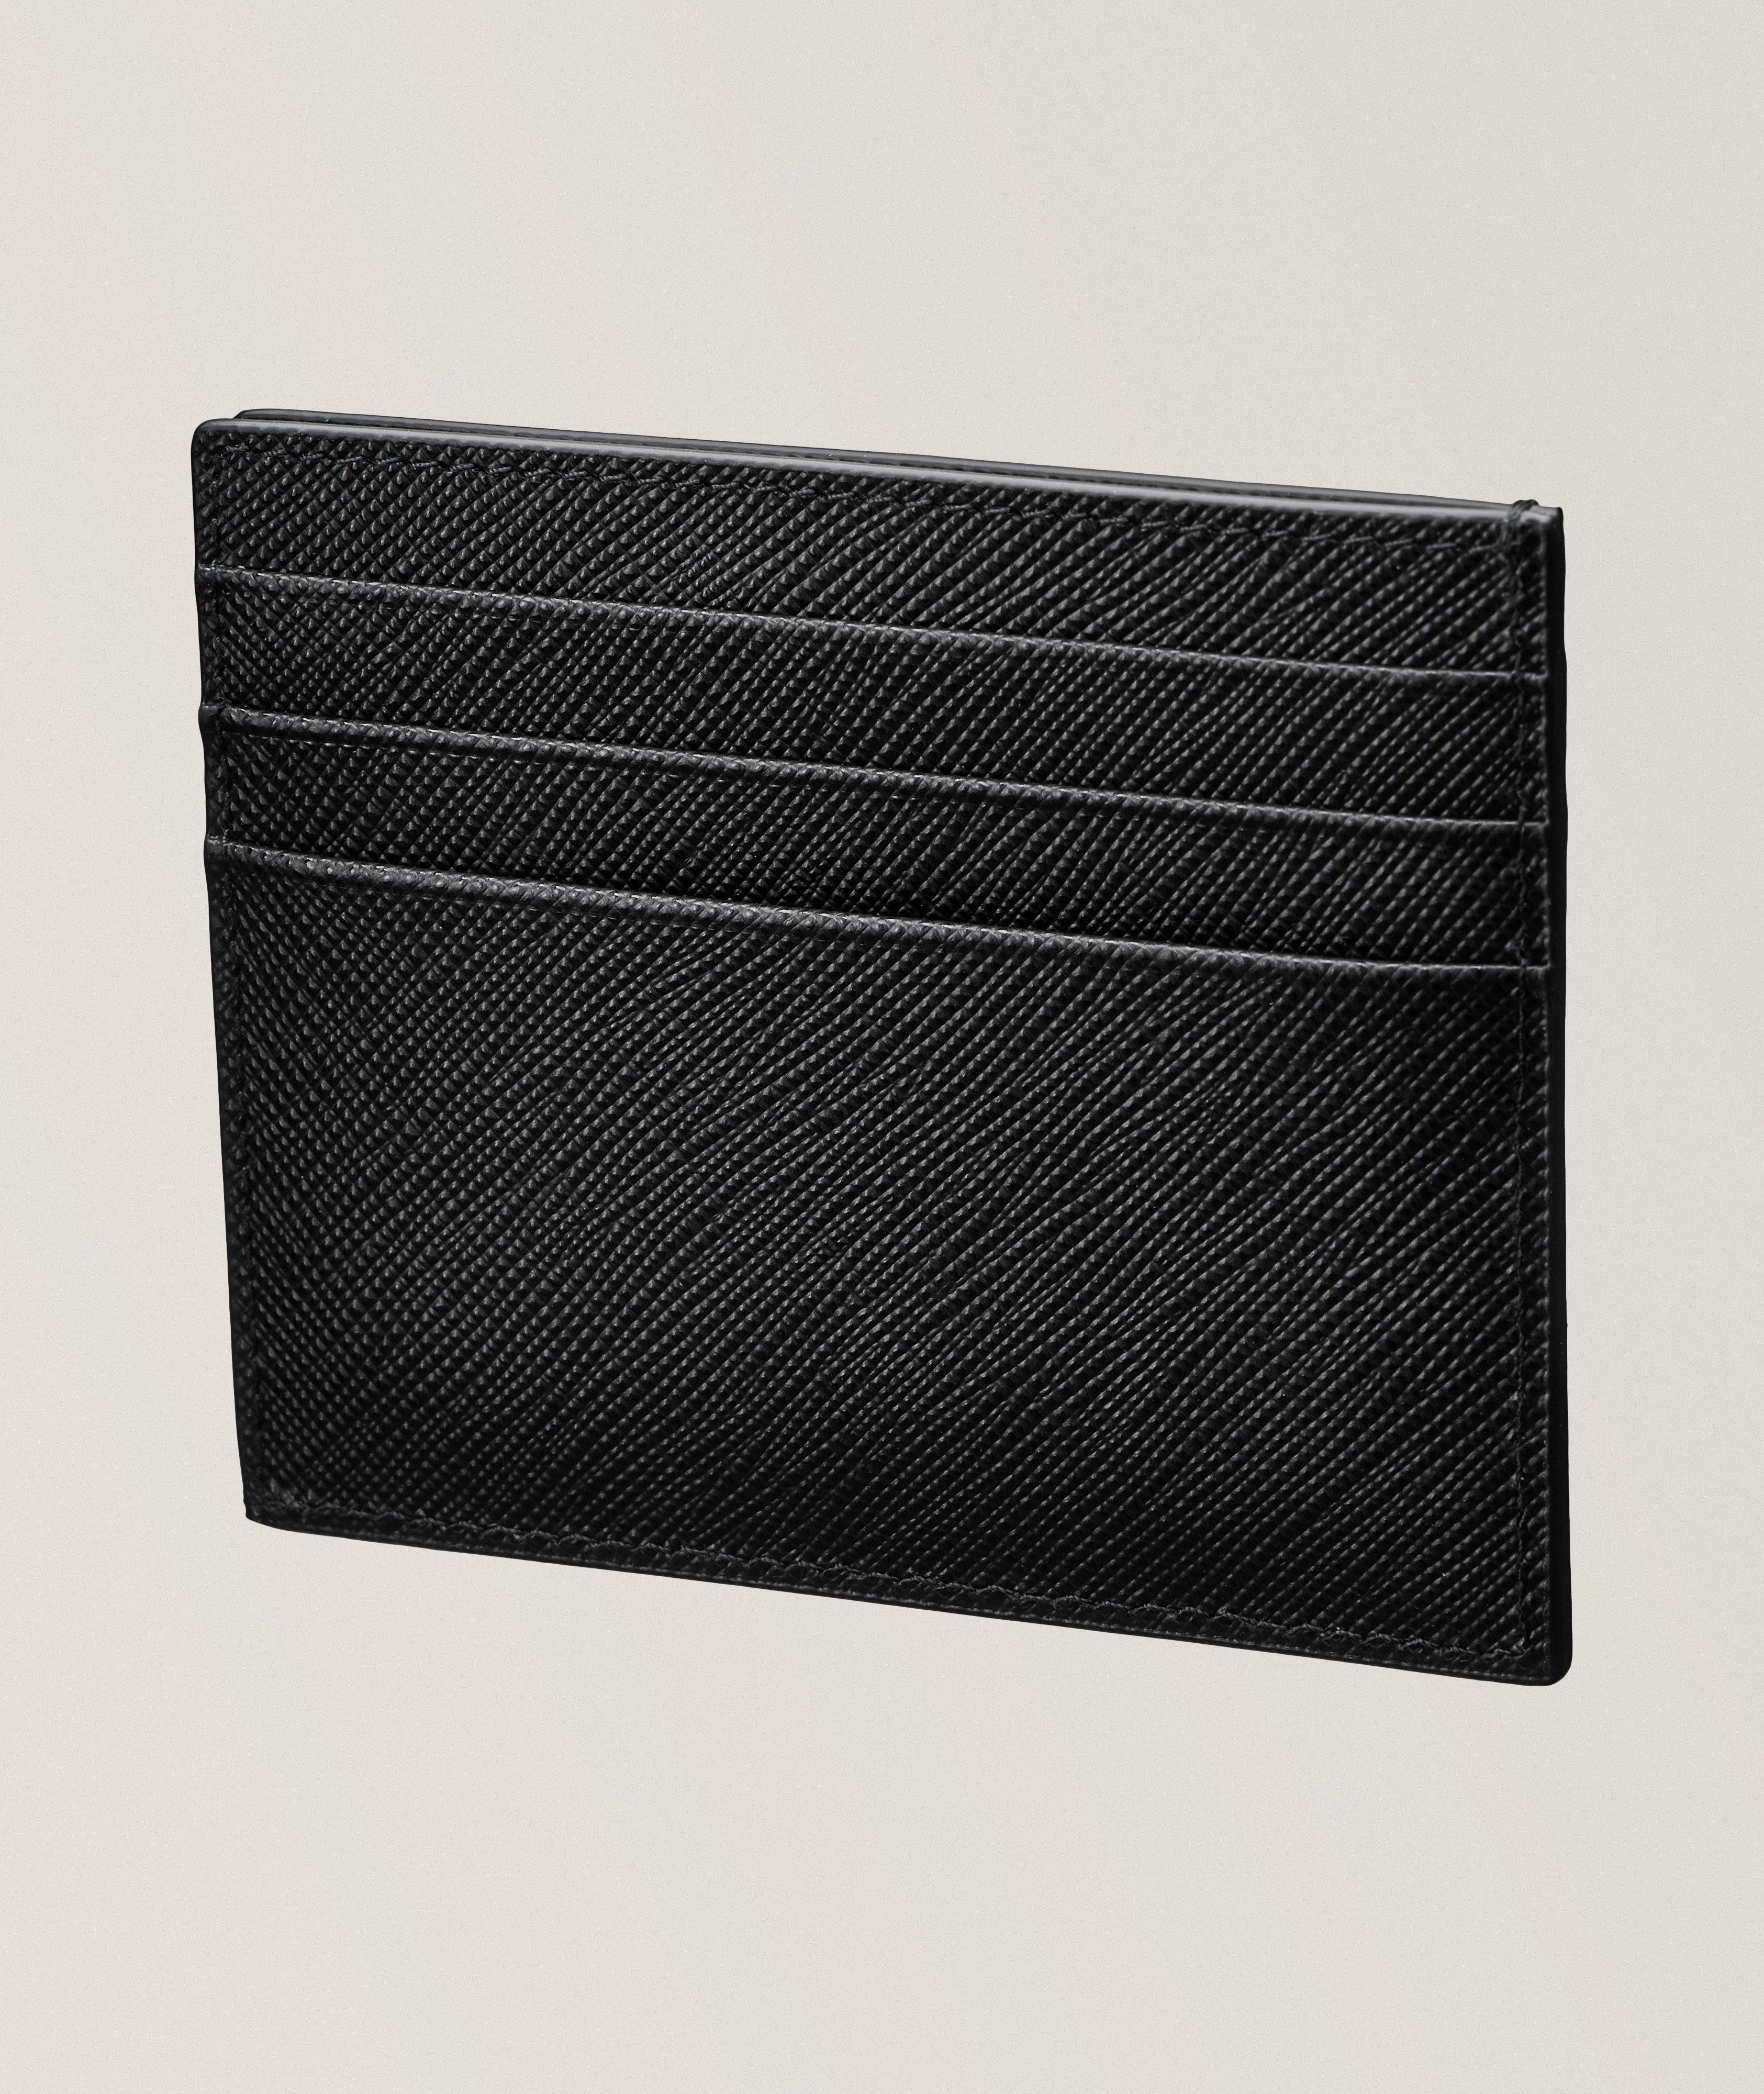 Textured Saffiano Leather Cardholder image 1